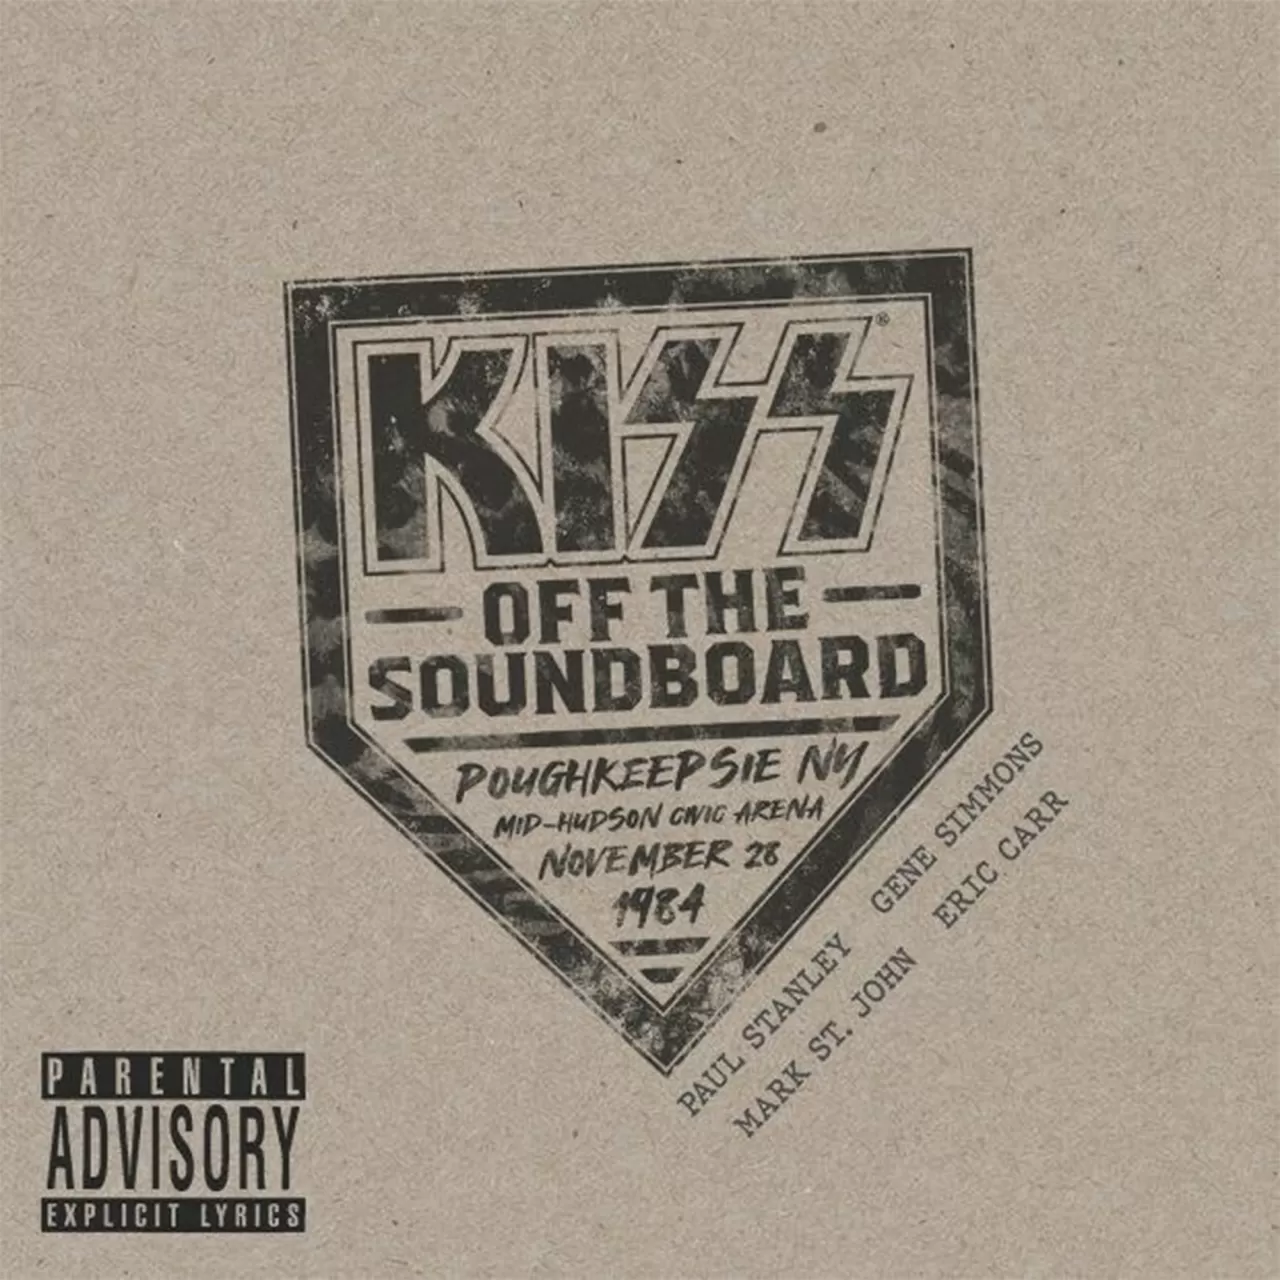 On April 7, rock icons KISS will release the next installment of their Off The Soundboard official live bootleg series with KISS – Off The Soundboard: Poughkeepsie, New York, 1984. Recorded live at the Mid-Hudson Arena on November 28th, 1984, during the Animalize World Tour, this is the fifth in a series of live releases by the band and will be available to stream and download, with a 2-LP standard black vinyl set, CD, and a limited edition 2-LP img#1